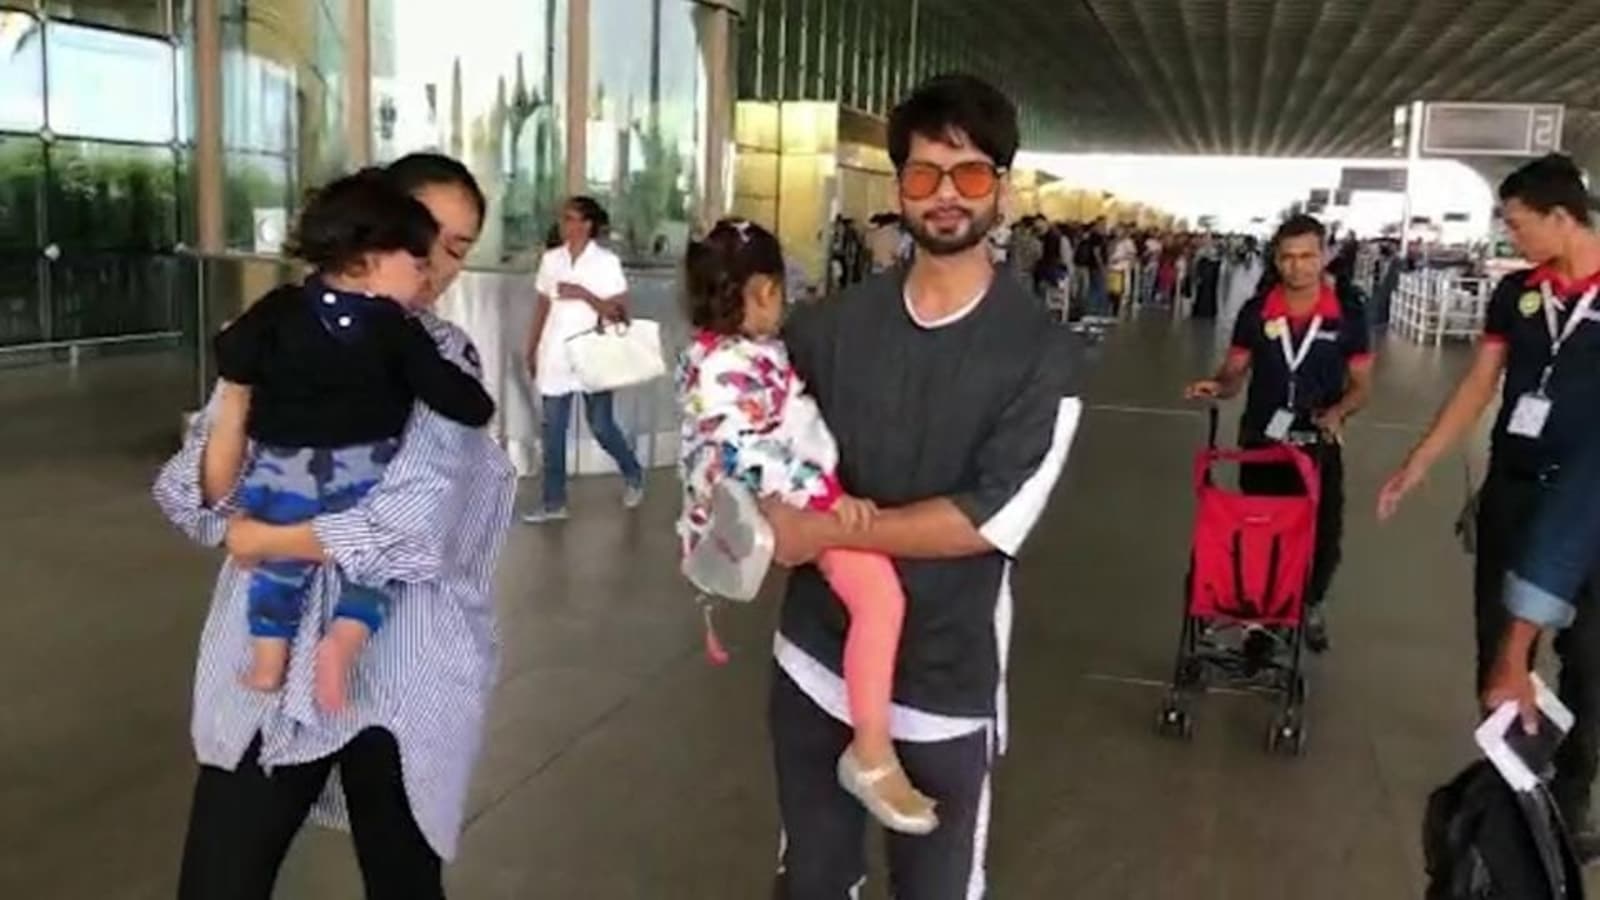 Shahid Kapoor jokes he is thrown out of his house by wife Mira Rajput and kids every day: ‘Meri aukat hi nahi hai’